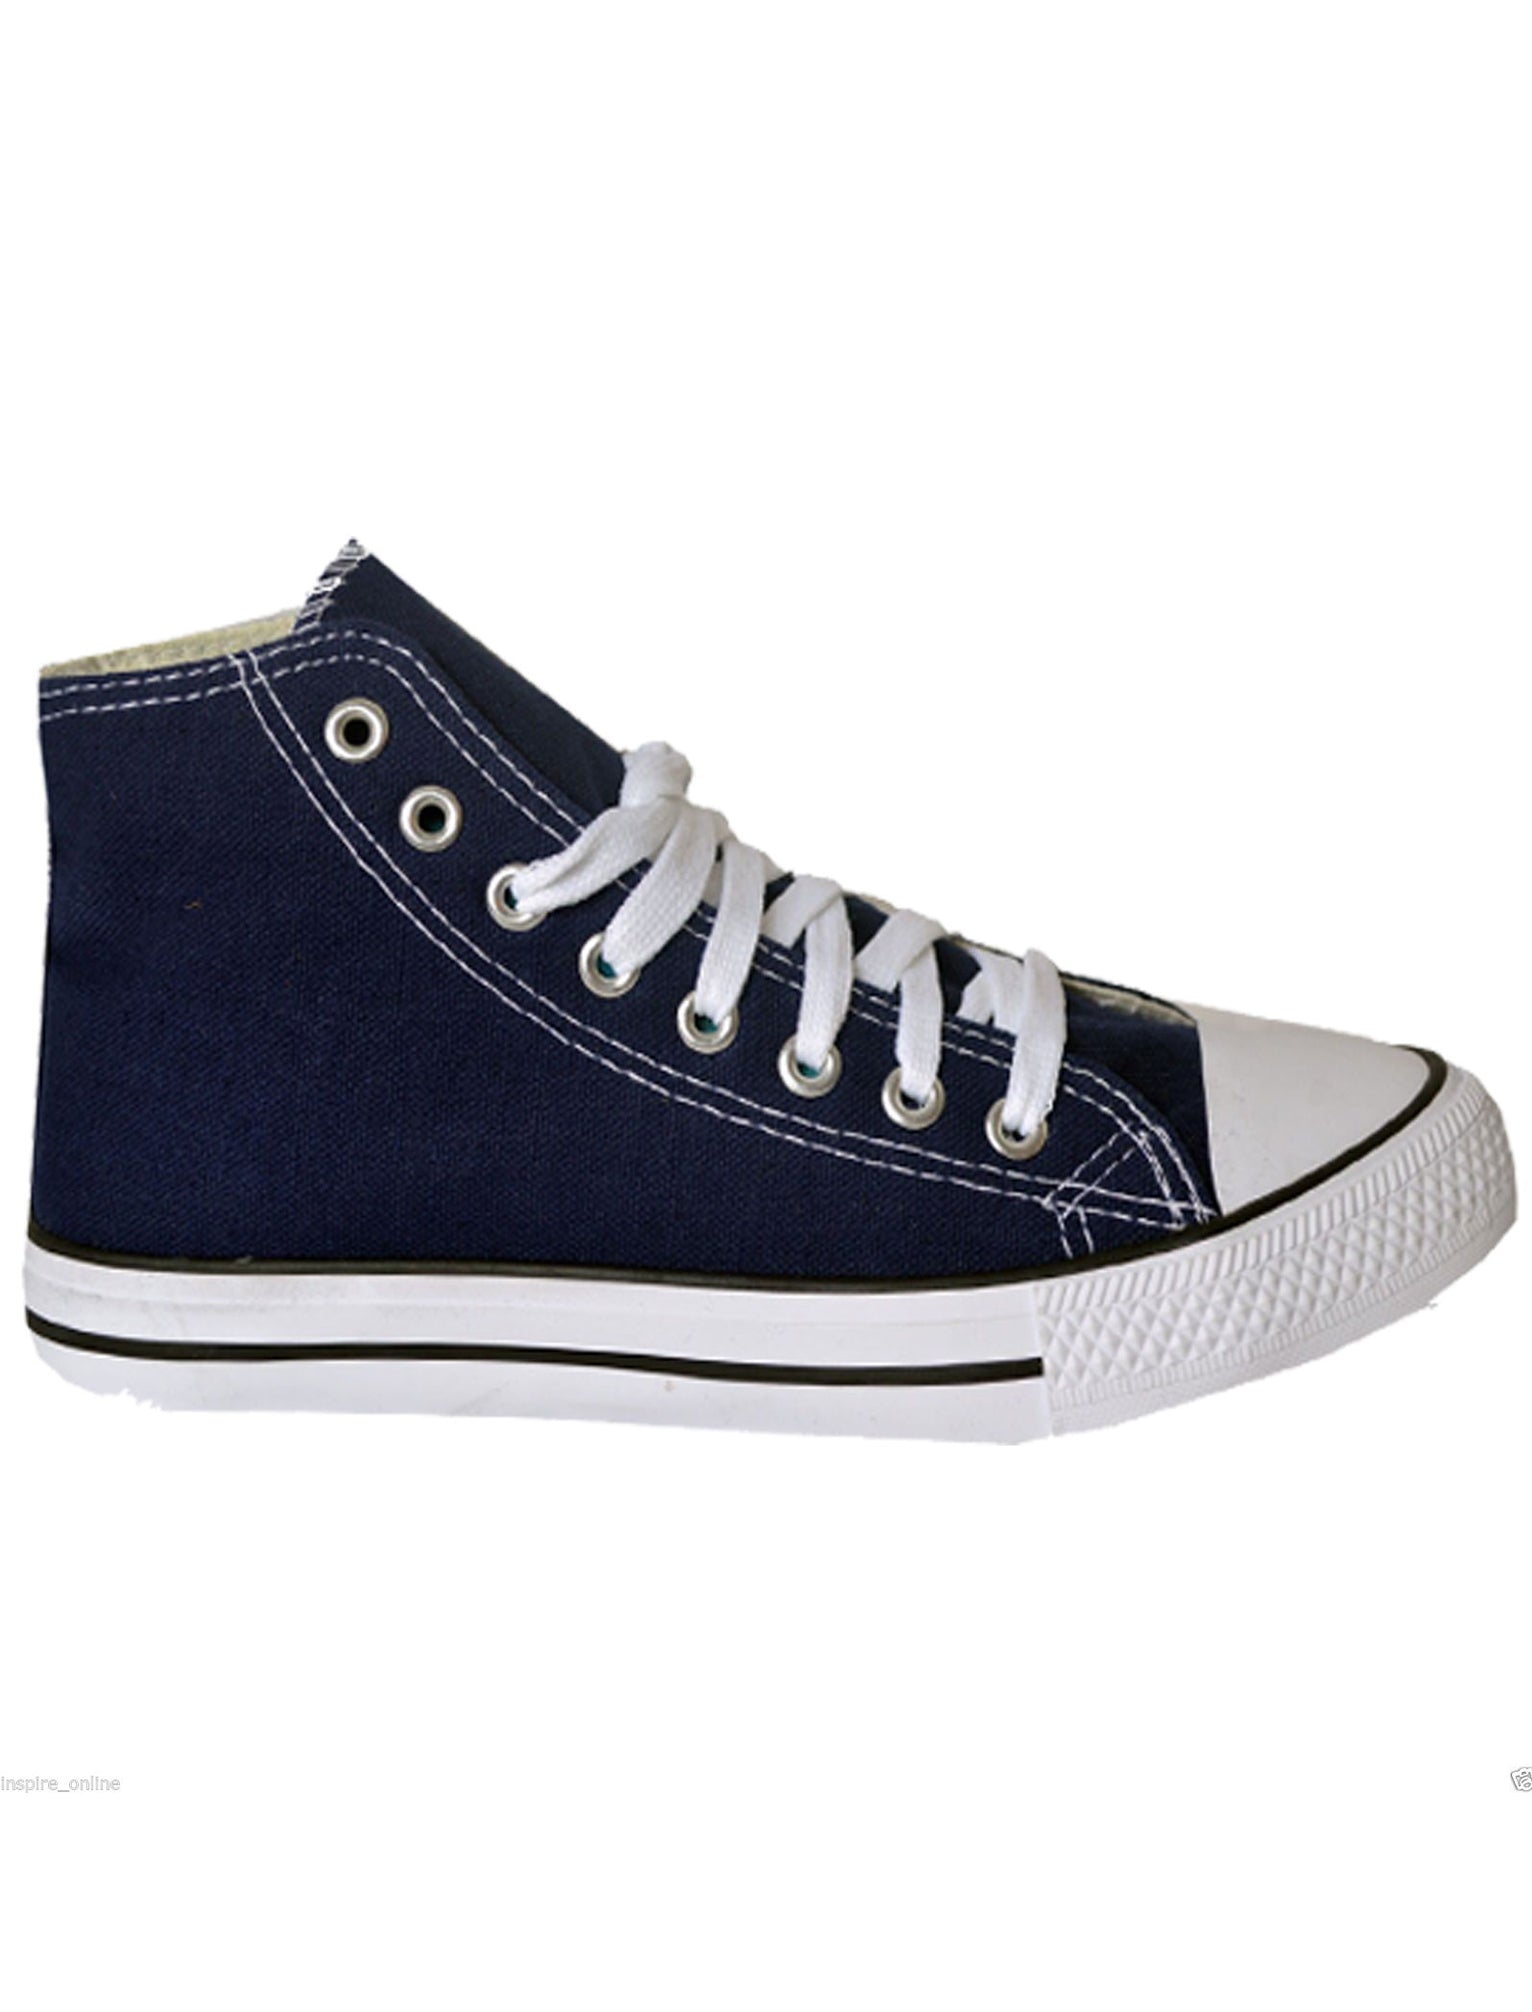 Shoes Womens Clara Lace Up Canvas Hi Top Trainers In Navy / Uk 3 - Tokyo Laundry